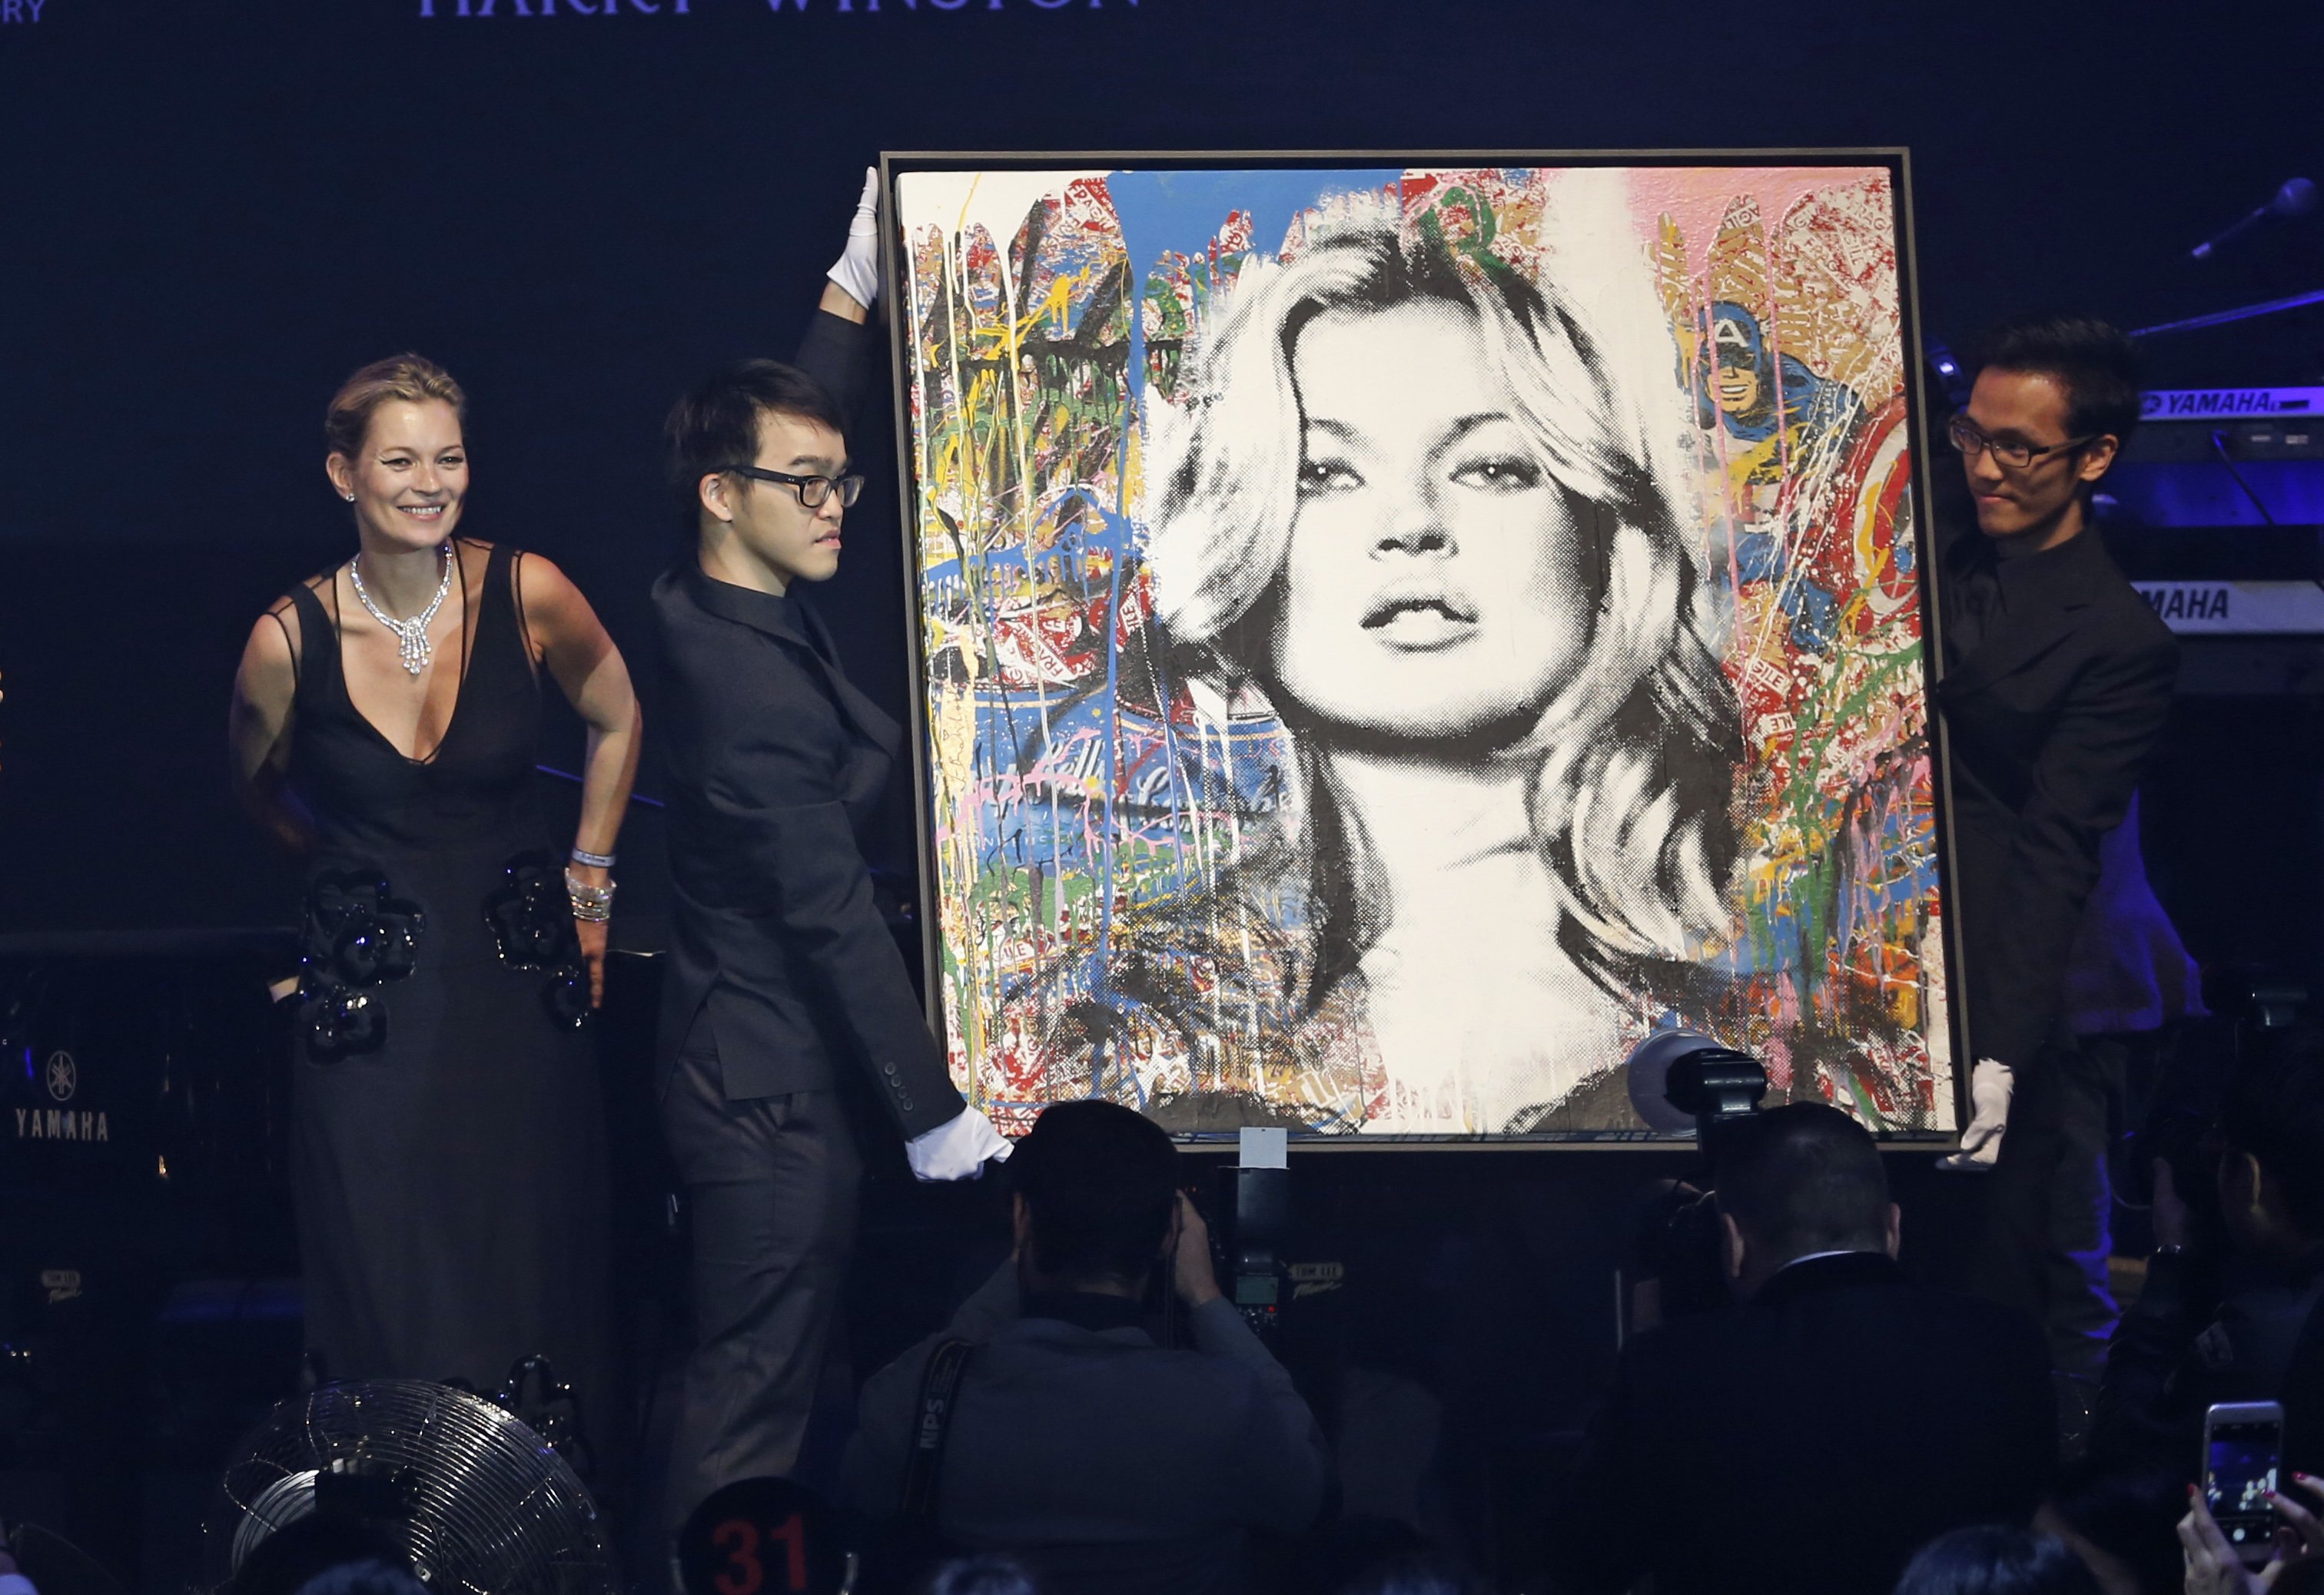 Kate Moss, left, stands next to the artwork "Kate Moss" created by French street artist Mr. Brainwash. Photo: AP